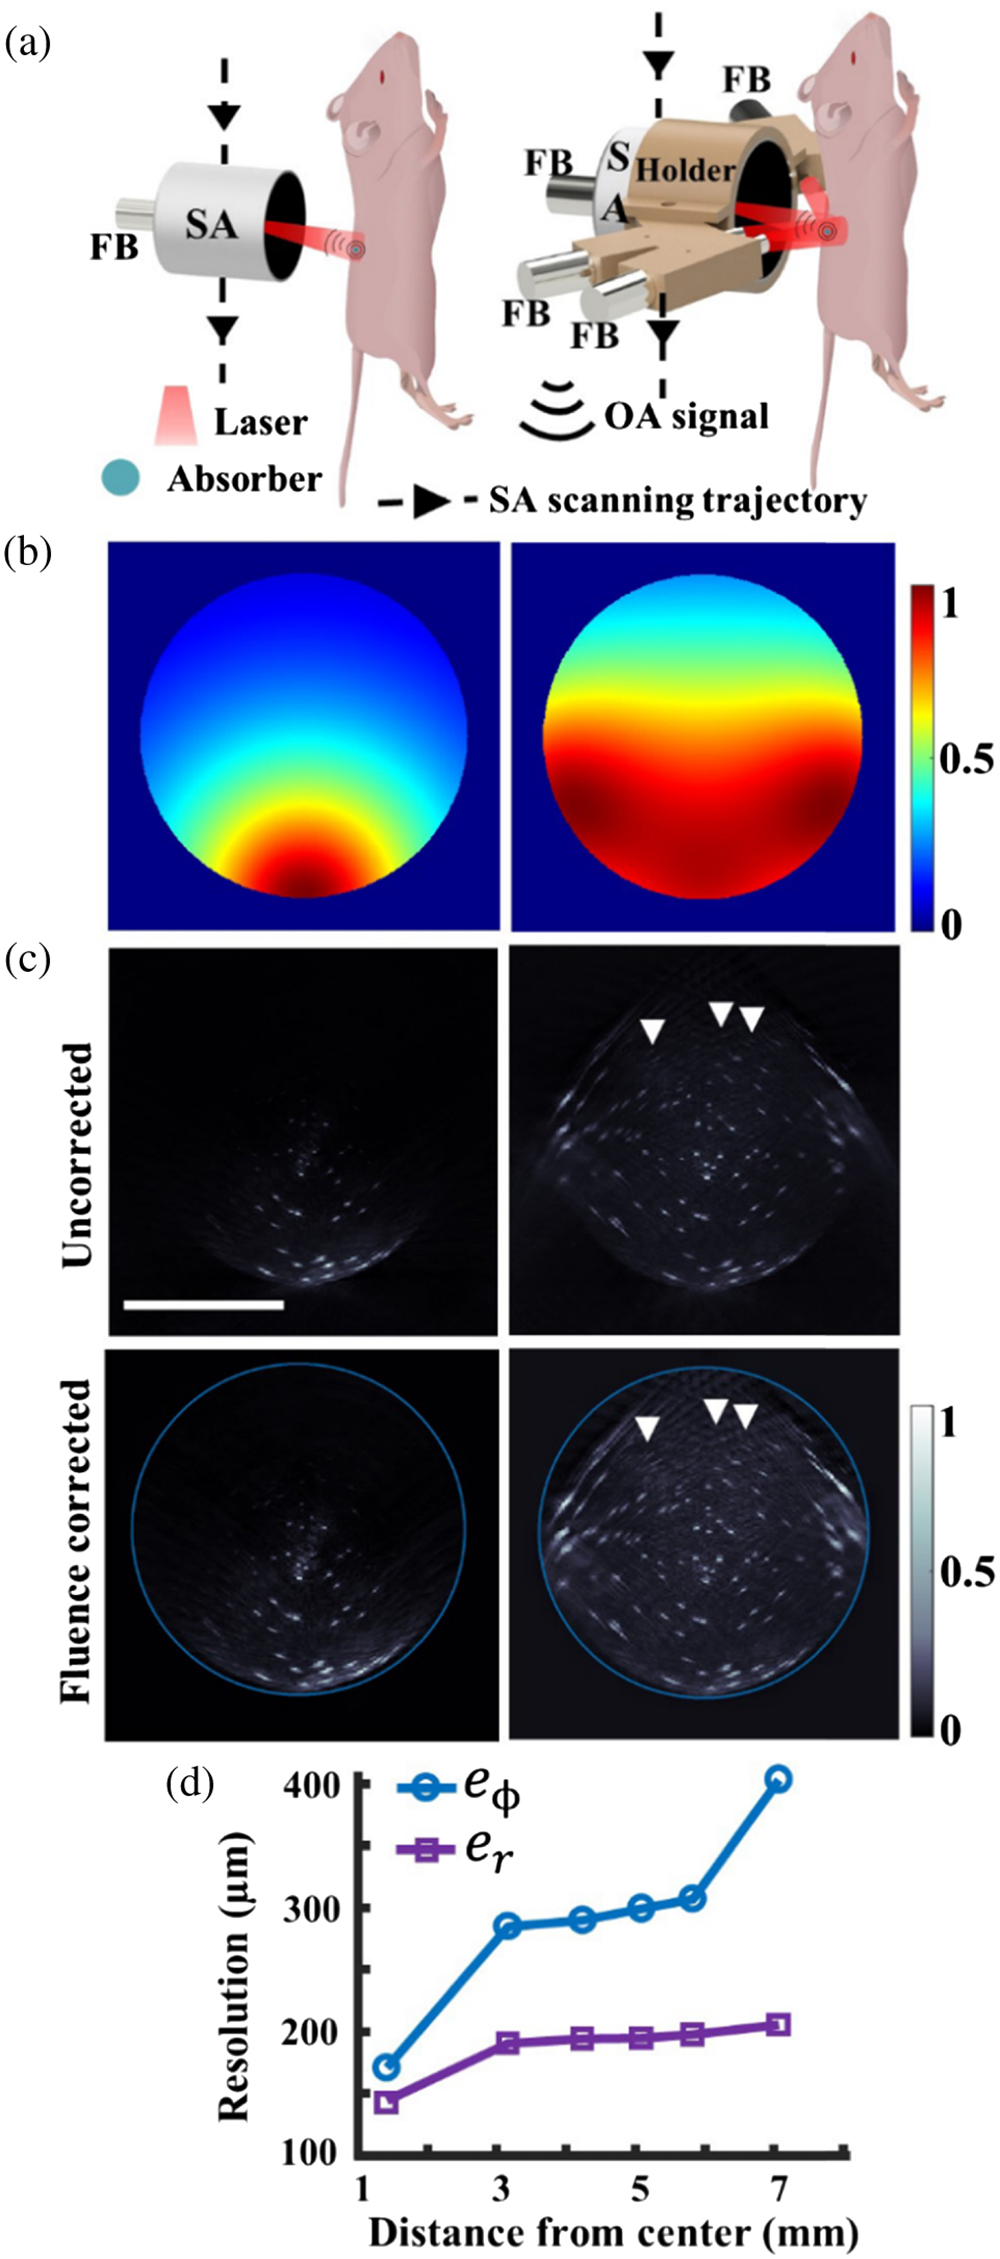 Single-sweep volumetric optoacoustic tomography (sSVOT) system characterization. (a) Schematic of the sSVOT scanner showing the difference between the single-beam illumination based (left) and multibeam illumination (right) approach. SA, spherical array; FB, fiber bundle; and OA, optoacoustic. (b) Simulated light distribution models for single-beam illumination (left) and multibeam illumination (right). (c) Maximum intensity projections (MIPs) across cross-sectional view demonstrating the spheres using single-beam (top left) and multibeam illumination (top right) approaches at single position of the spherical array. The corresponding fluence corrected images are shown at the bottom row. Arrows point to the spheres that appeared after the fluence correction. (d) Characterization of the reconstructed microsphere size in the central imaging plane along the radial (er) and azimuthal (eϕ) directions. Scale bar: 1 cm.